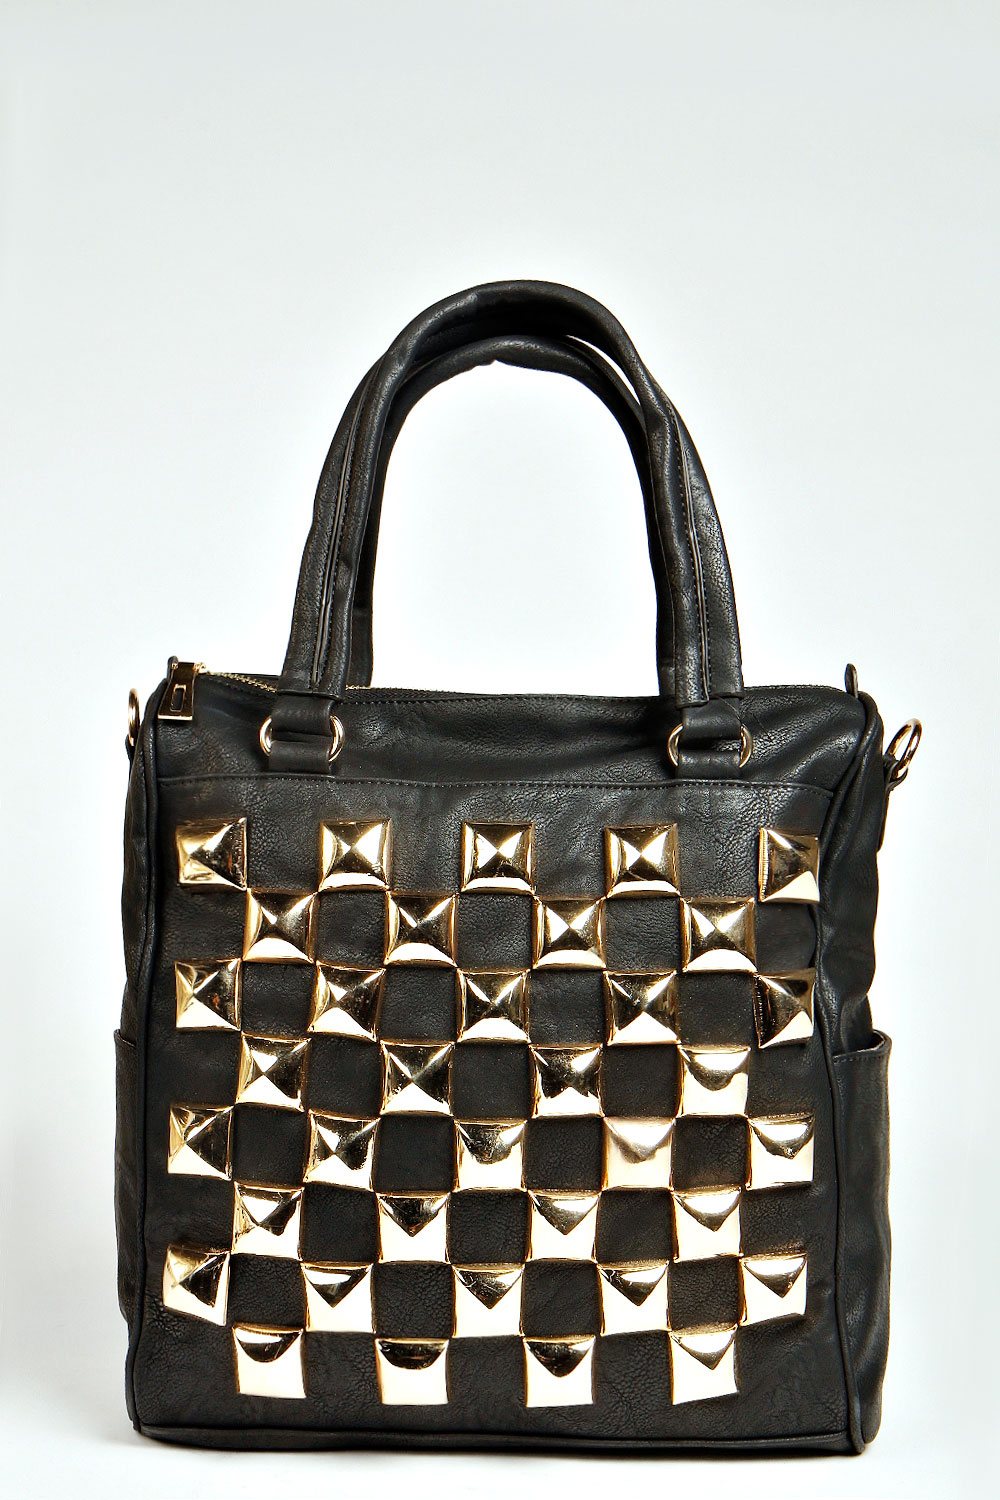 boohoo Lucy Stud Front Day Bag - black azz34756